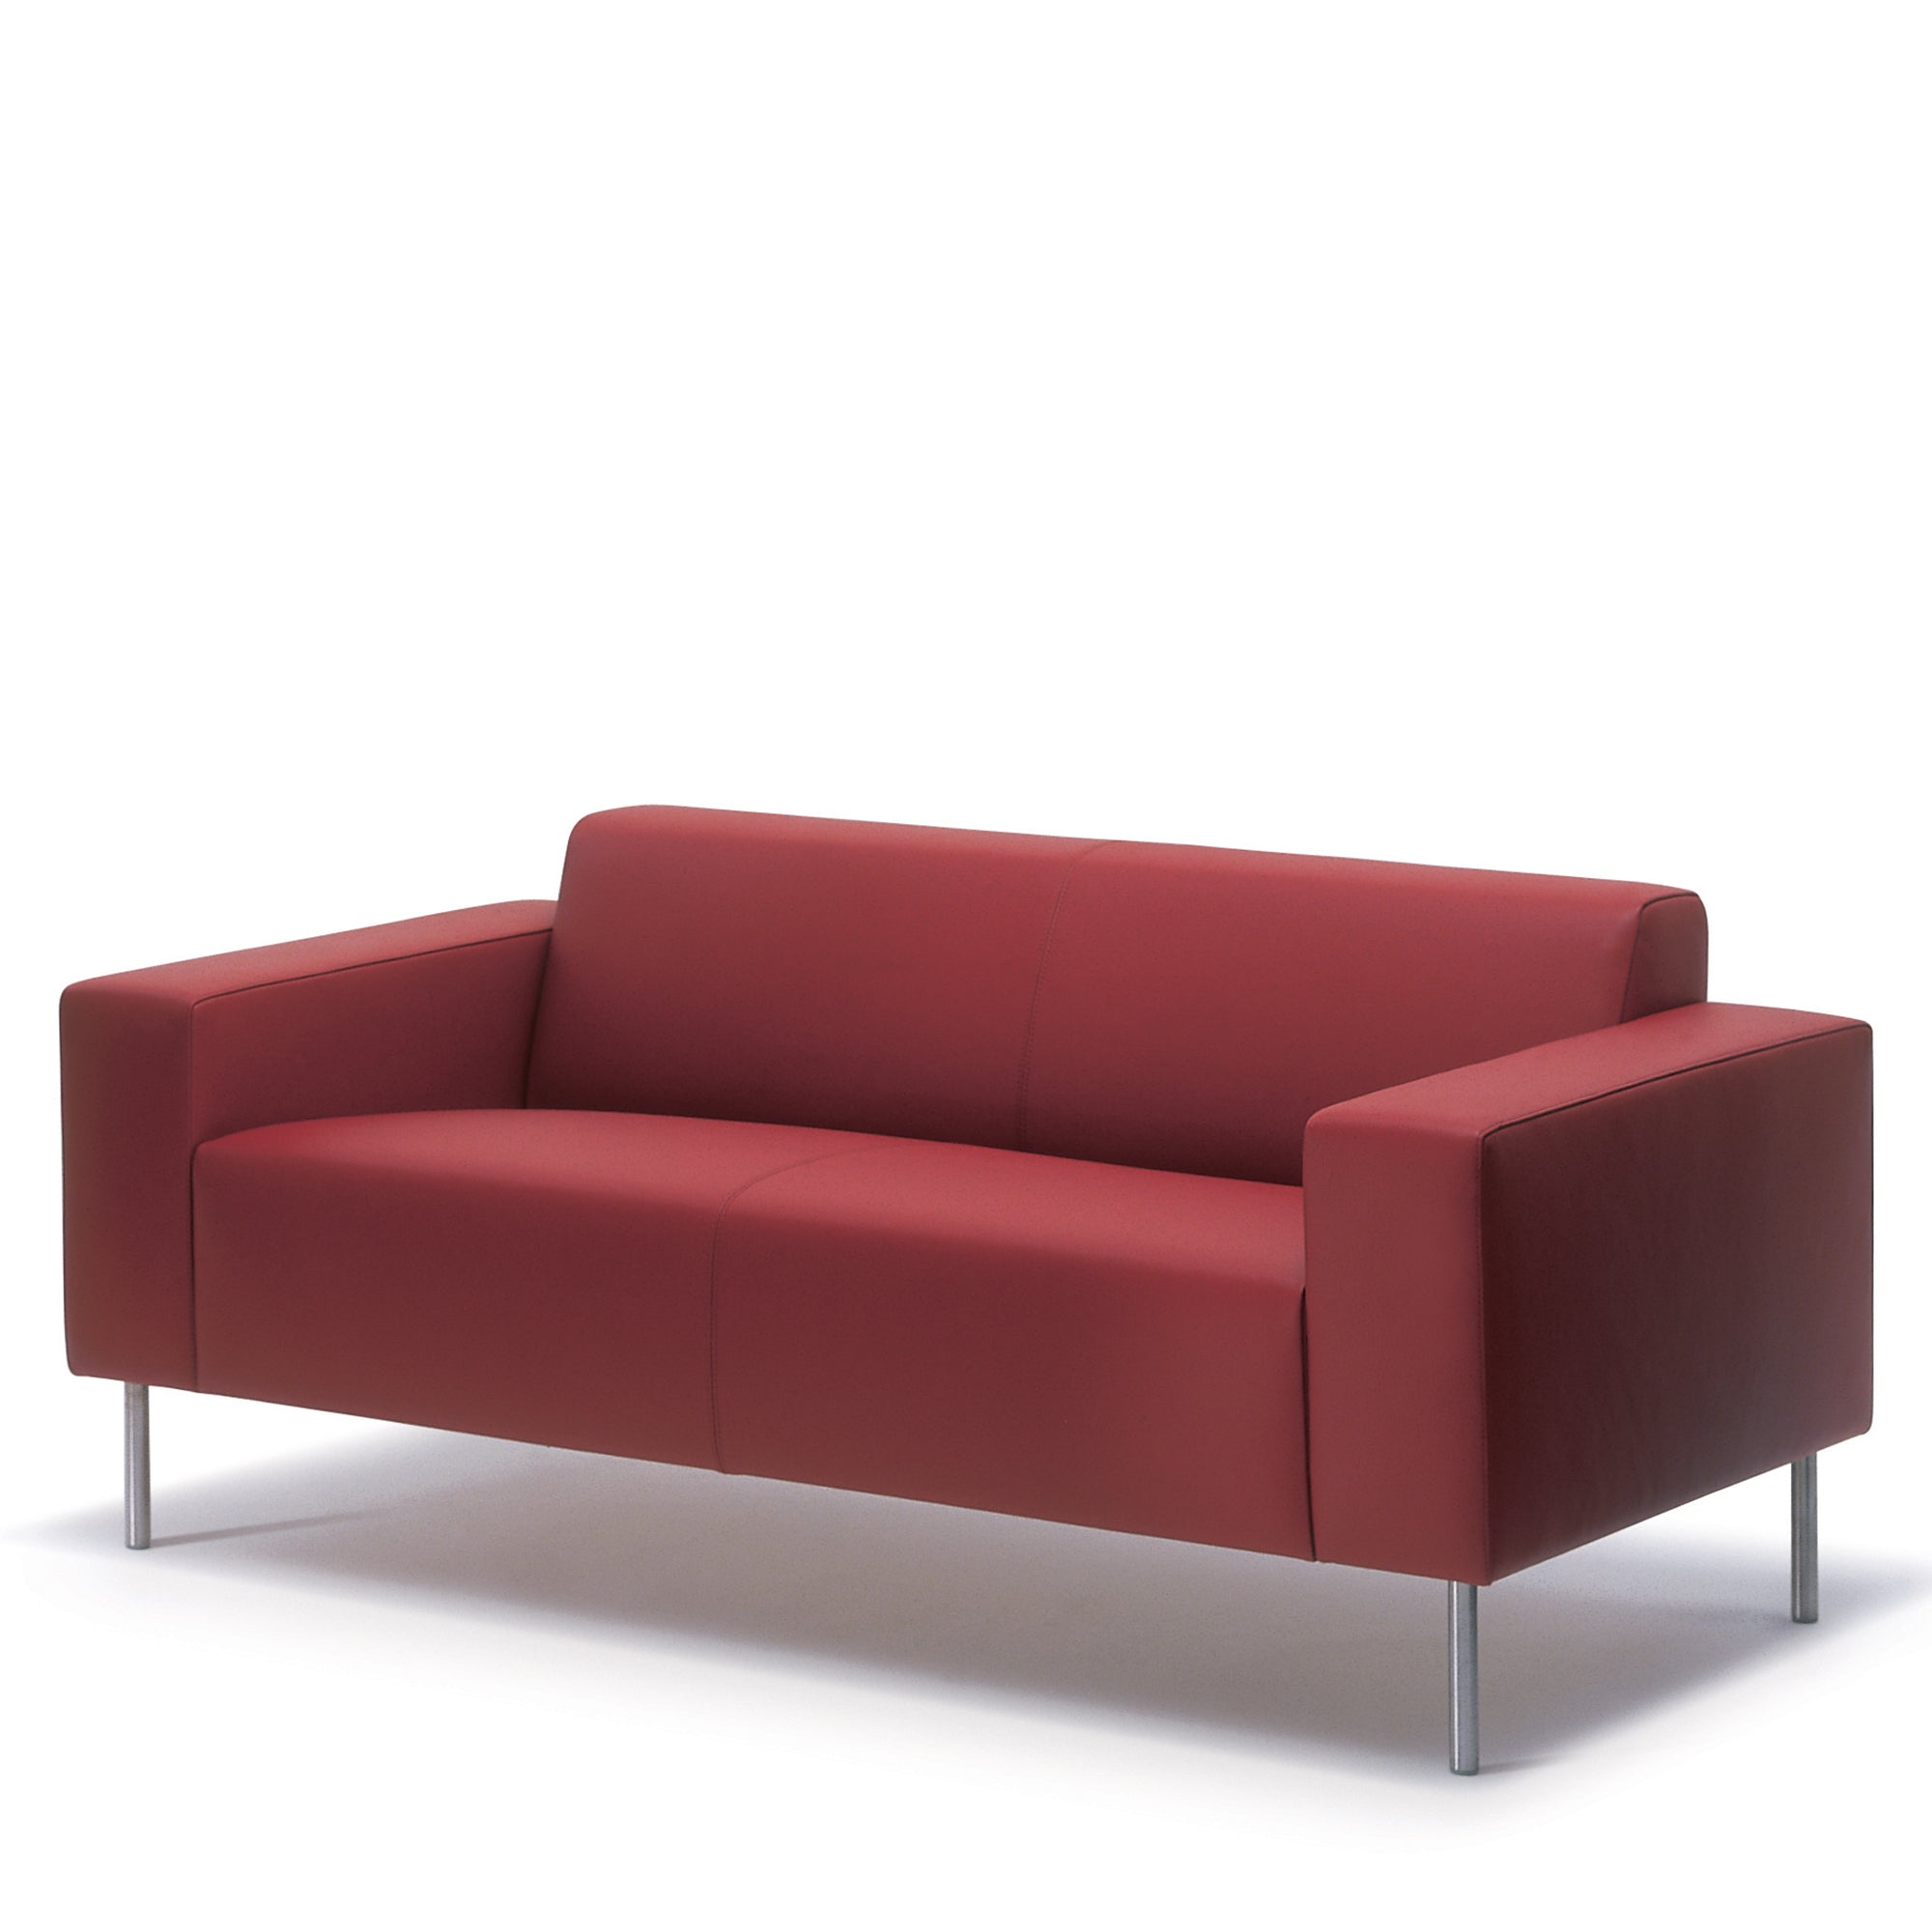 Hitch Mylius Office HM18 Origin Two Seat Sofa with Brushed Stainless Steel Legs